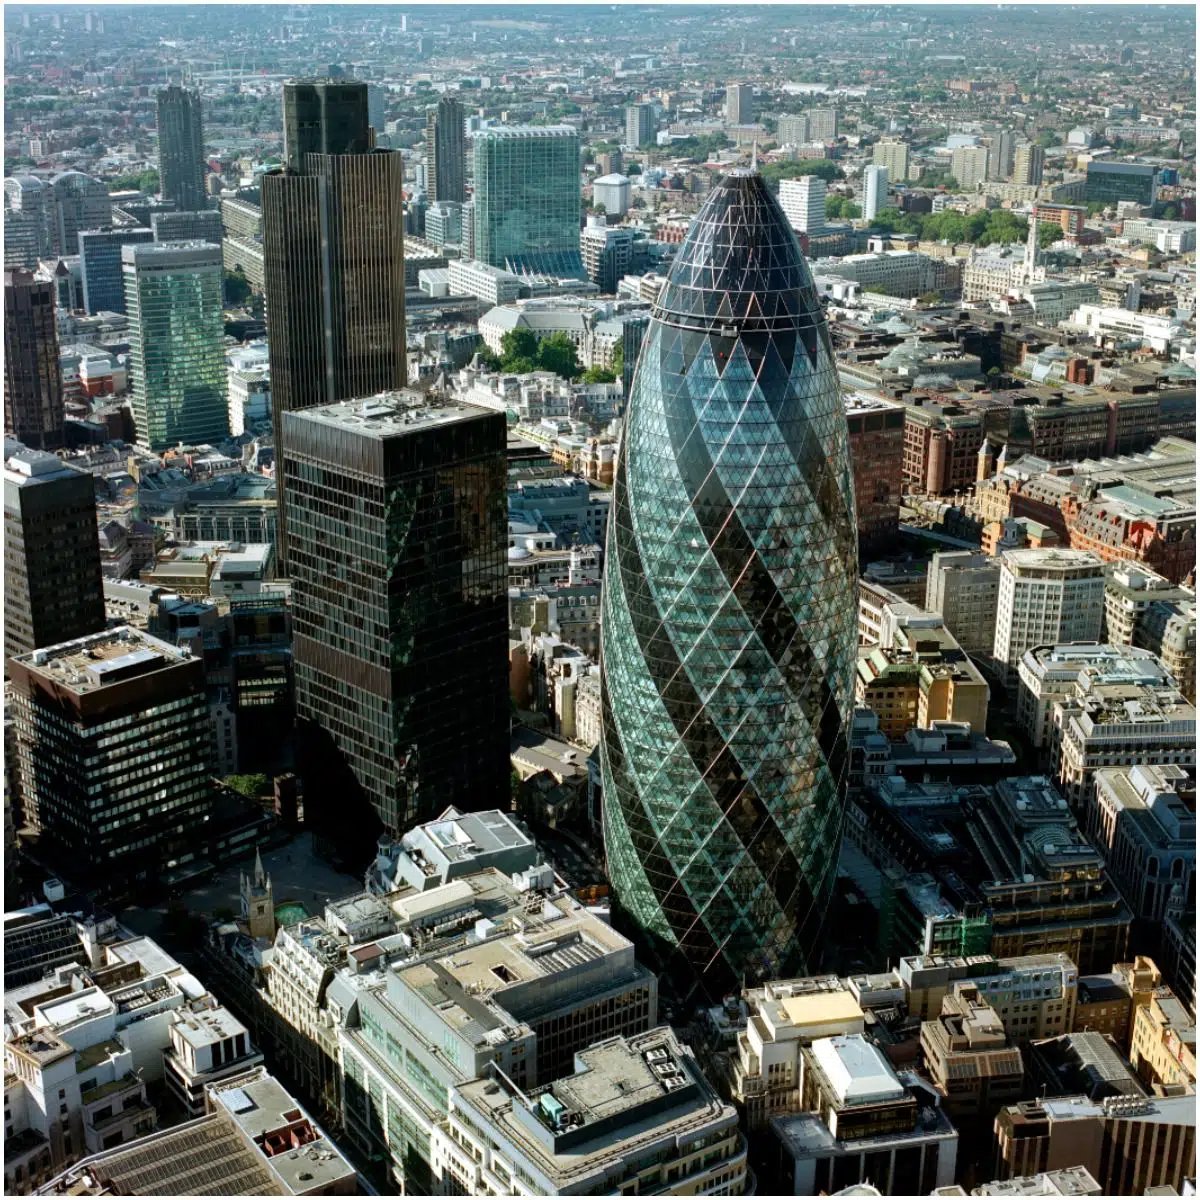 The Gherkin, designed by Norman Foster